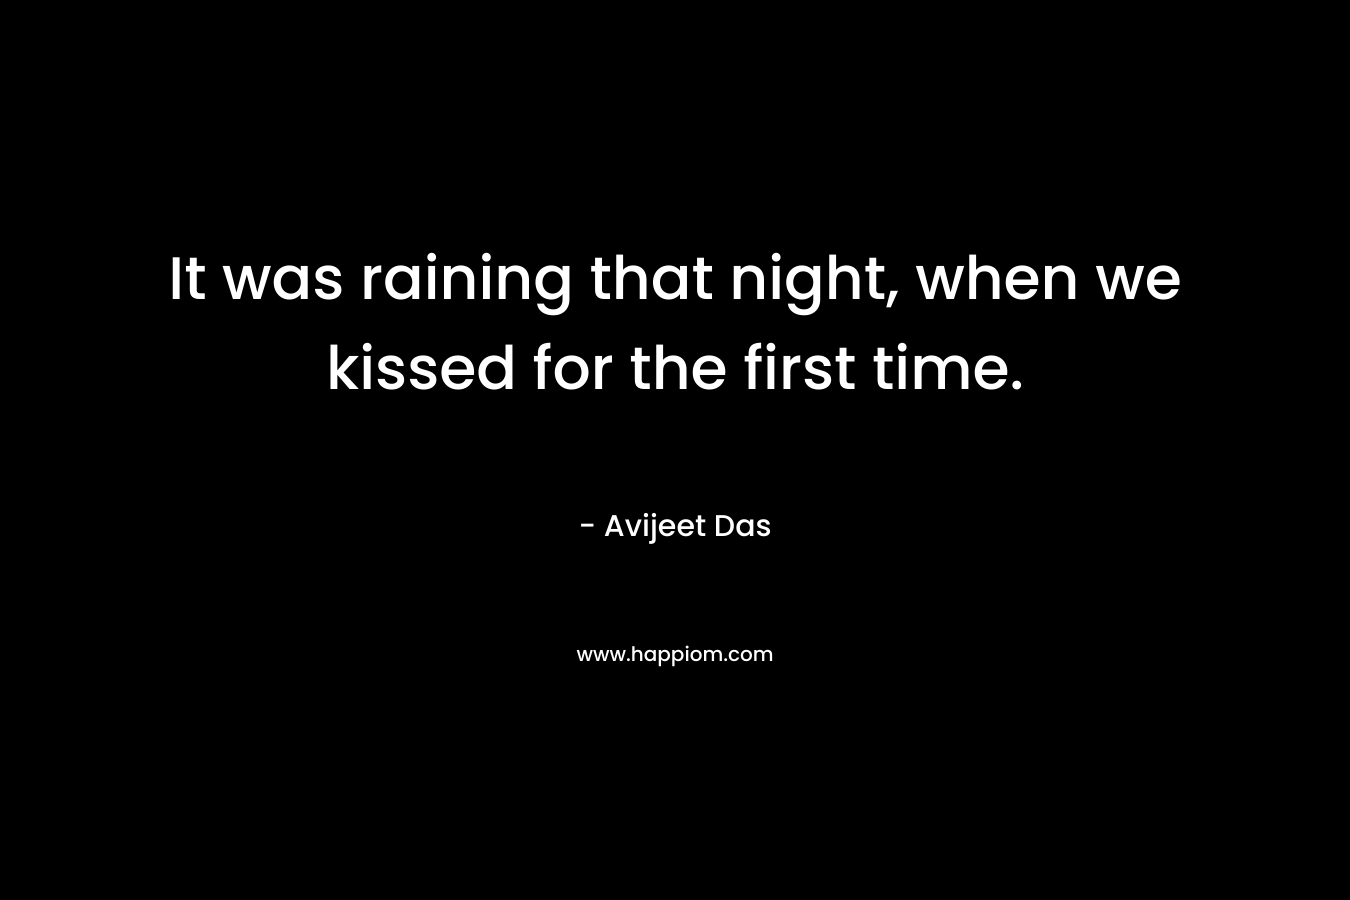 It was raining that night, when we kissed for the first time. – Avijeet Das